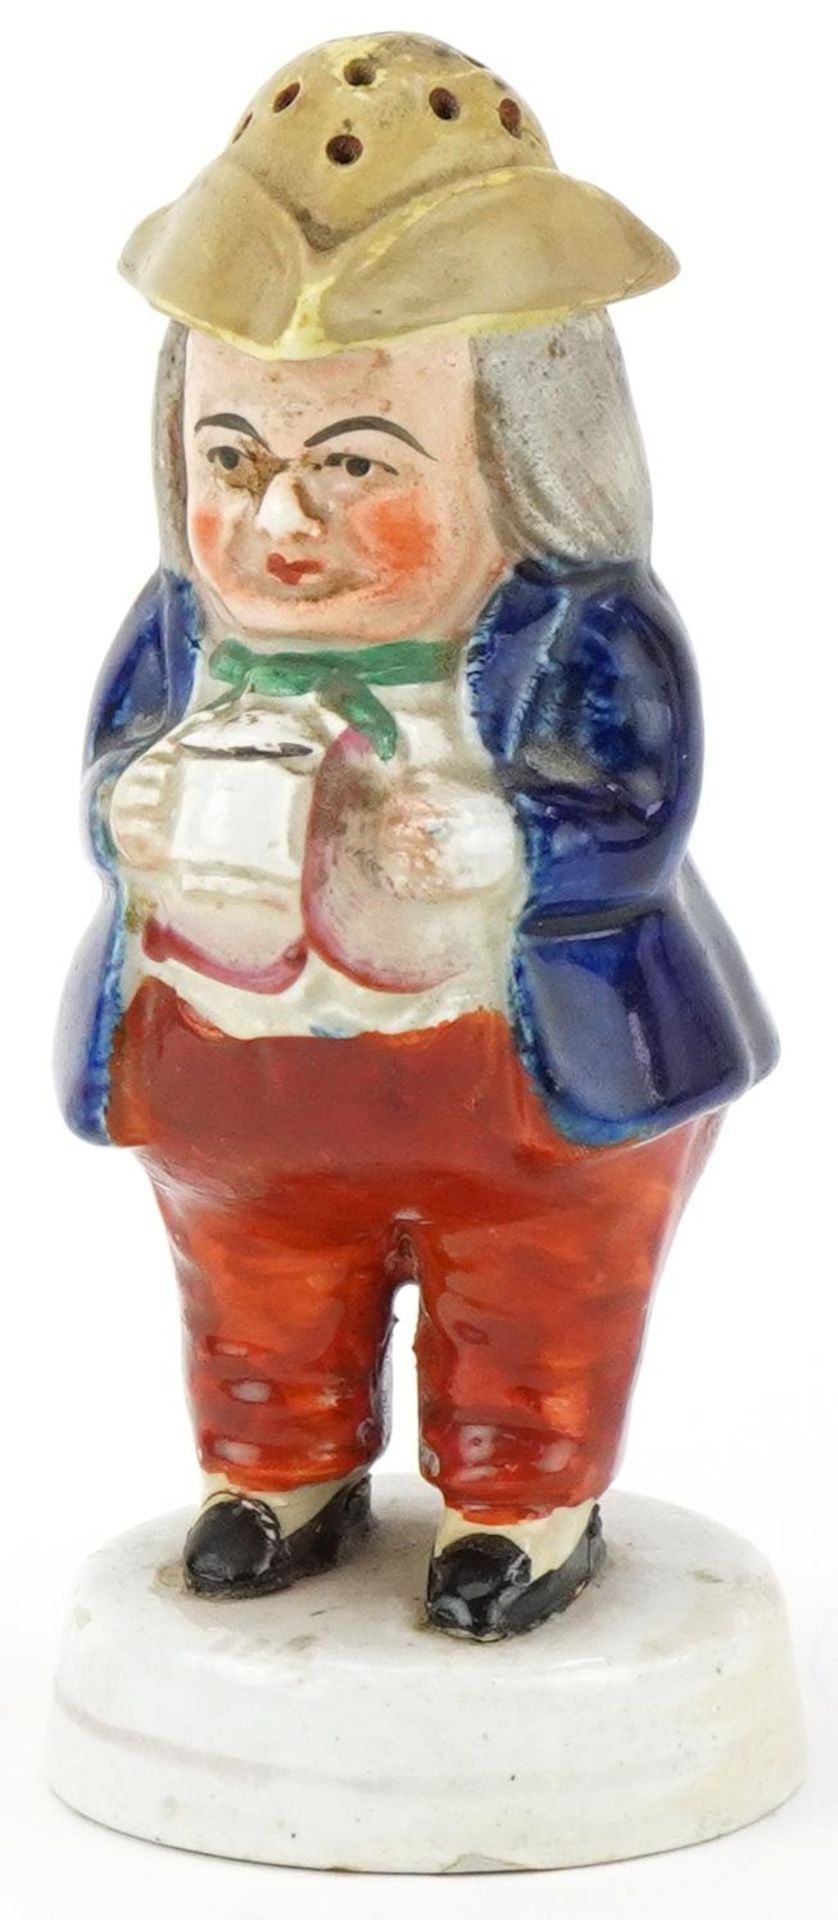 Victorian Staffordshire Toby pepperette, 14.5cm high